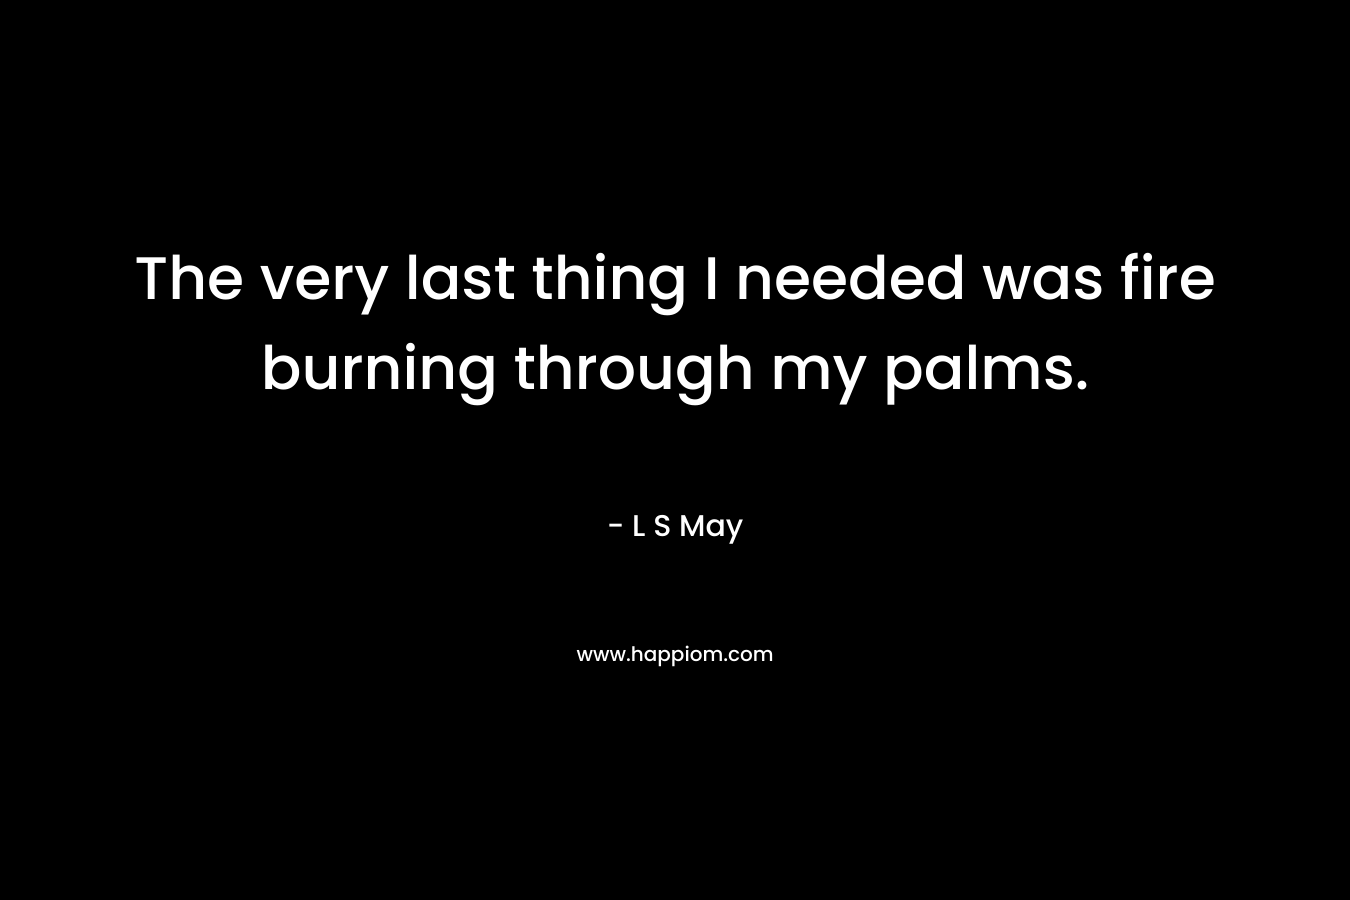 The very last thing I needed was fire burning through my palms. – L S May